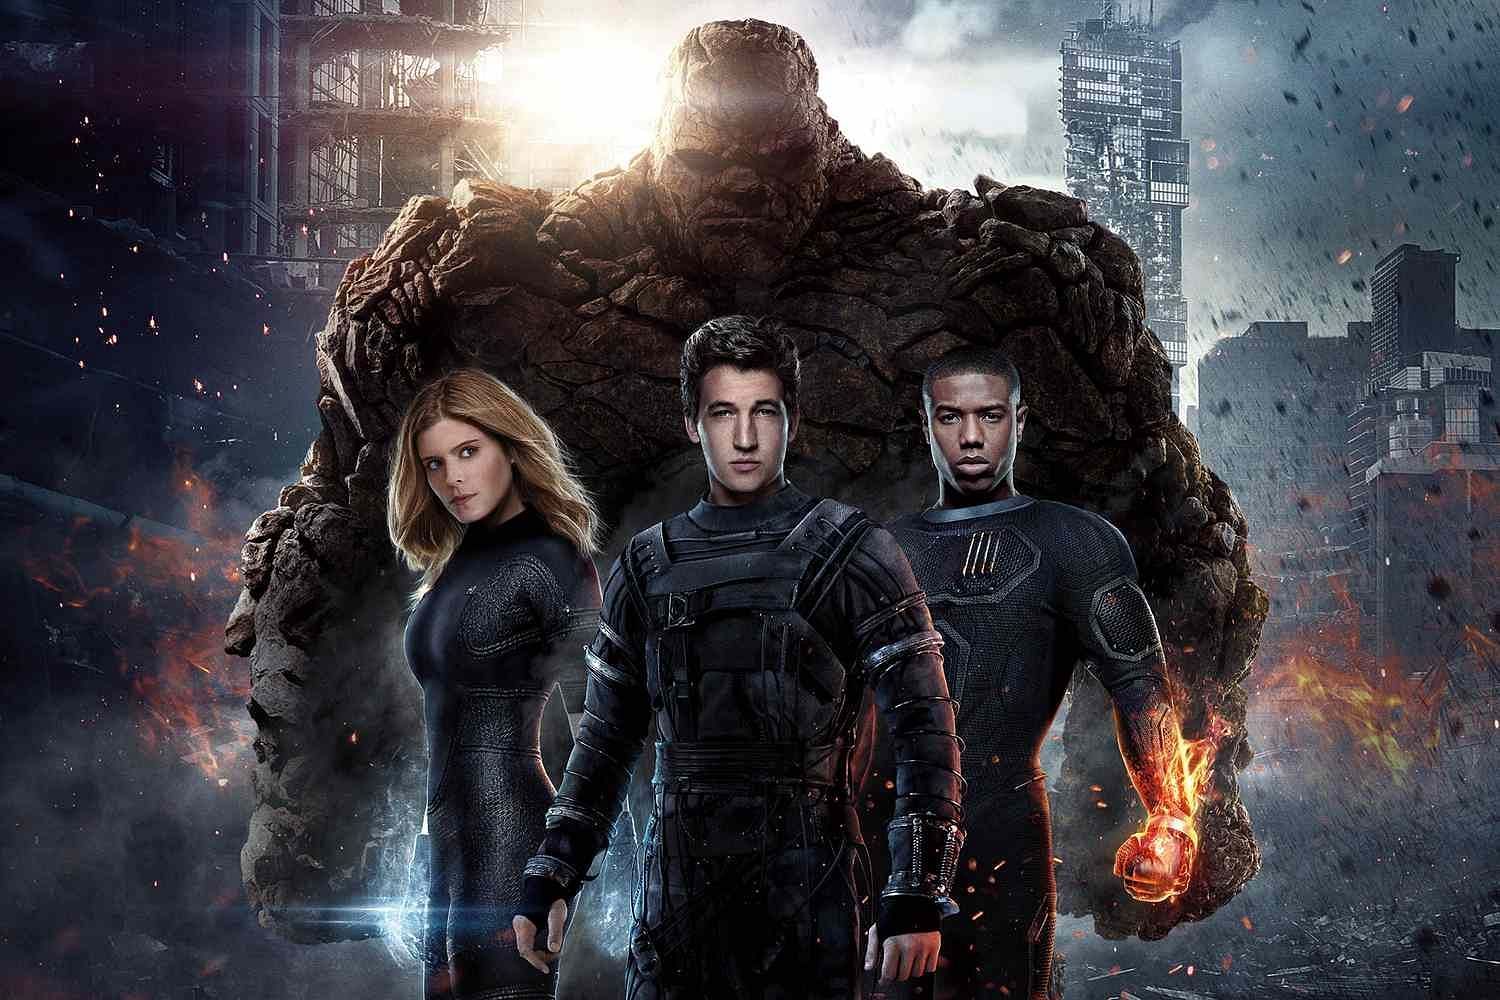 A lackluster reboot of a beloved Marvel team that failed to live up to the potential of the source material (Image via 20th Century Fox)